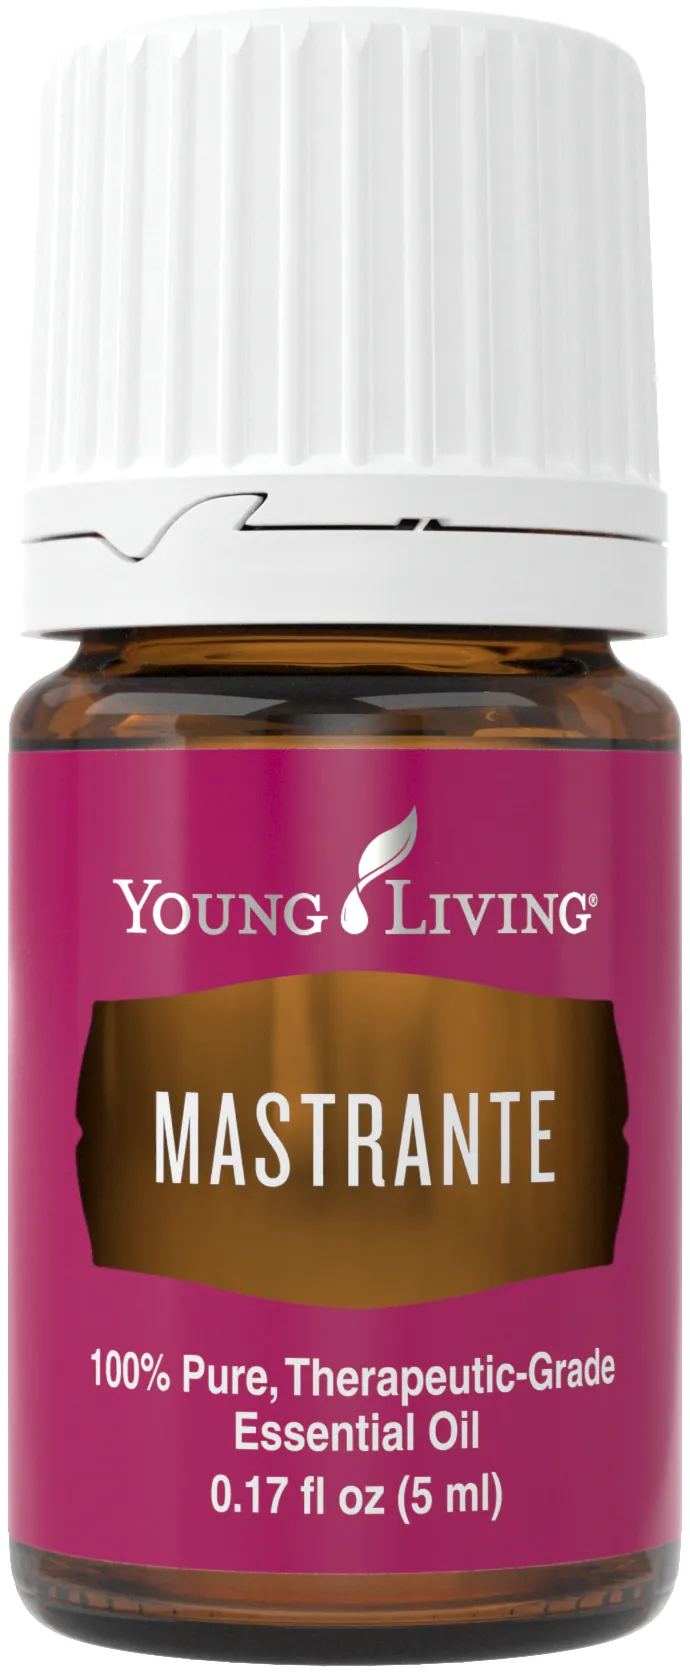 Ulei esential Mastrante, 5ml, 39062, Young Living